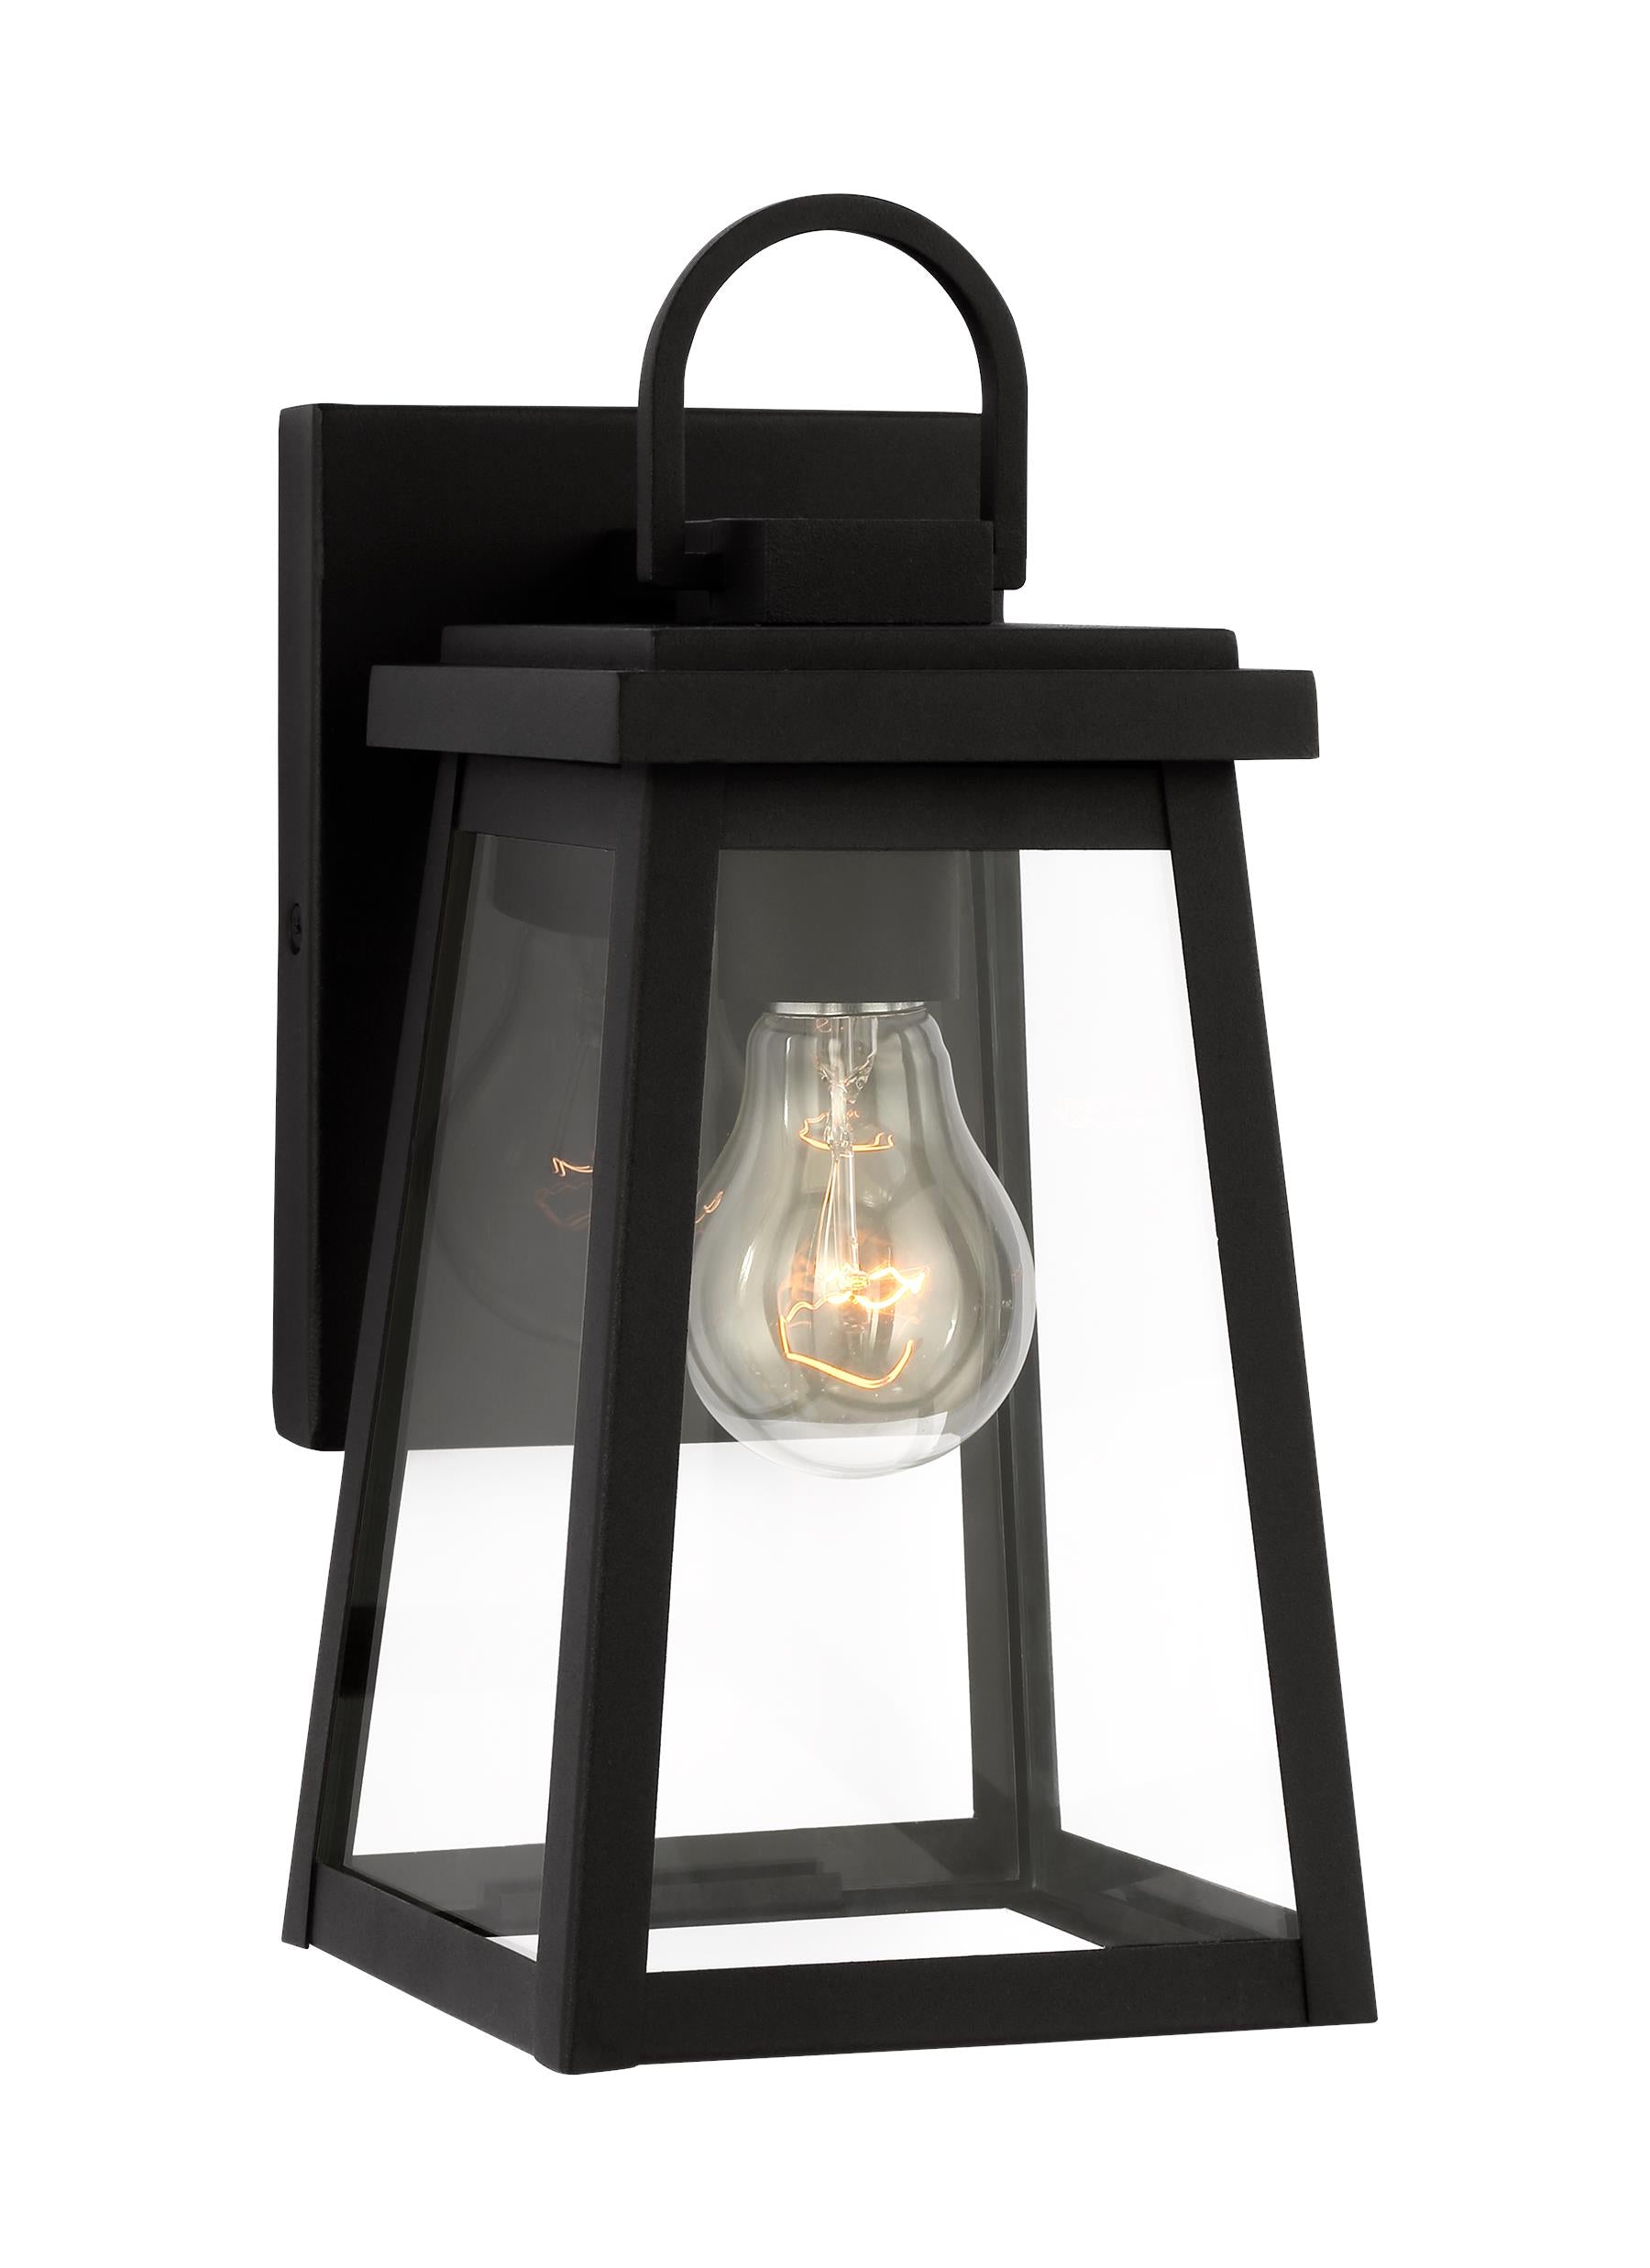 Founders 1L Outdoor Lantern - 8548401-12